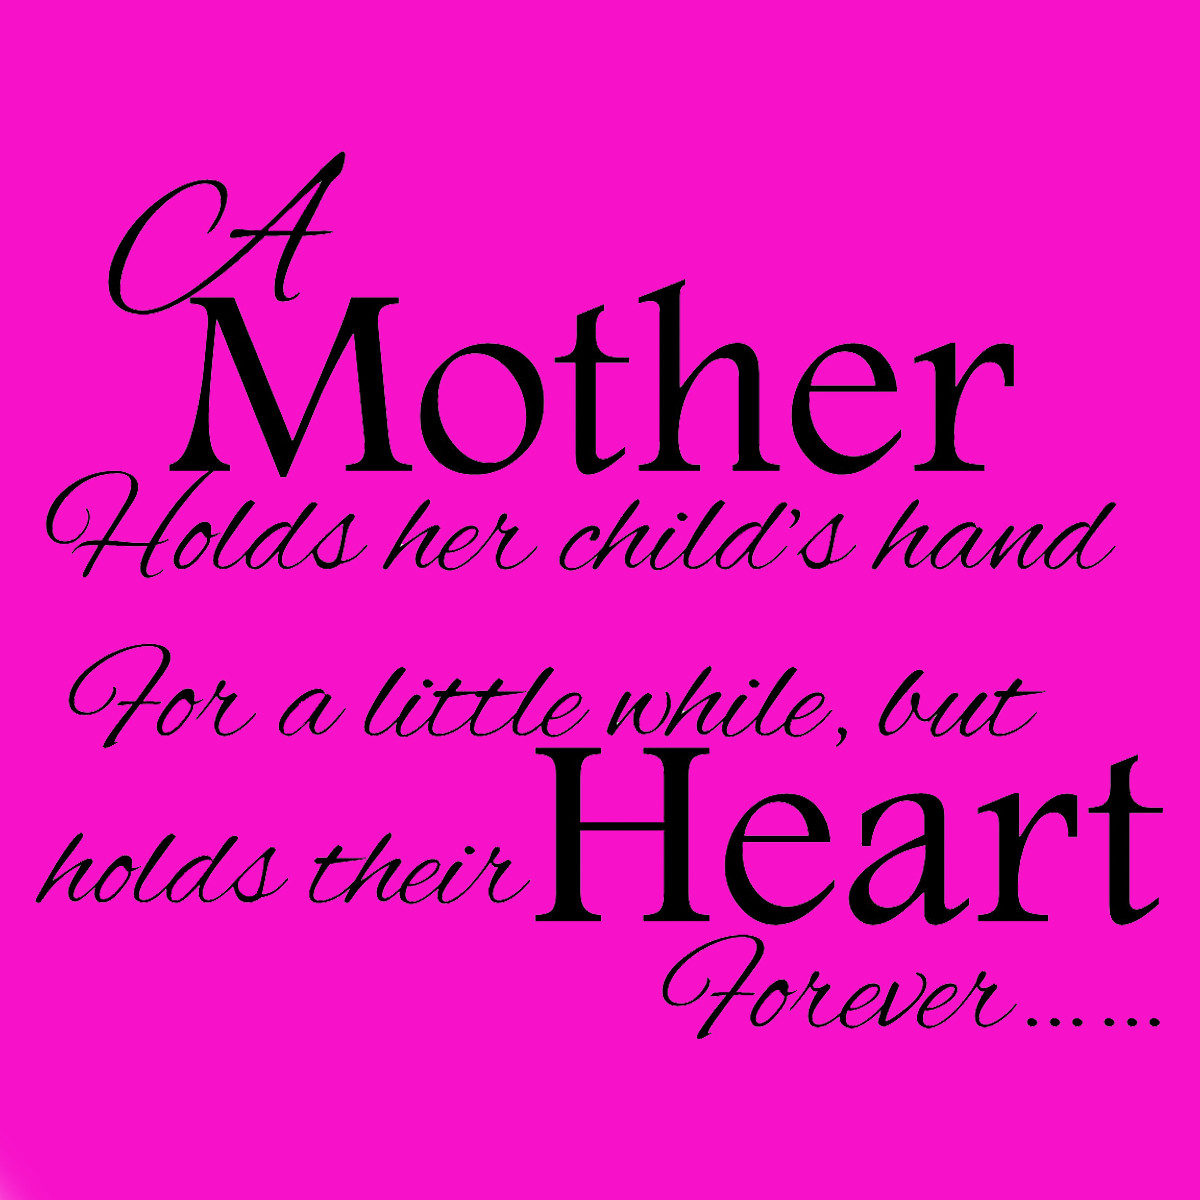 Mothers Day Quotes And Sayings
 Mothers Day Quotes For QuotesGram